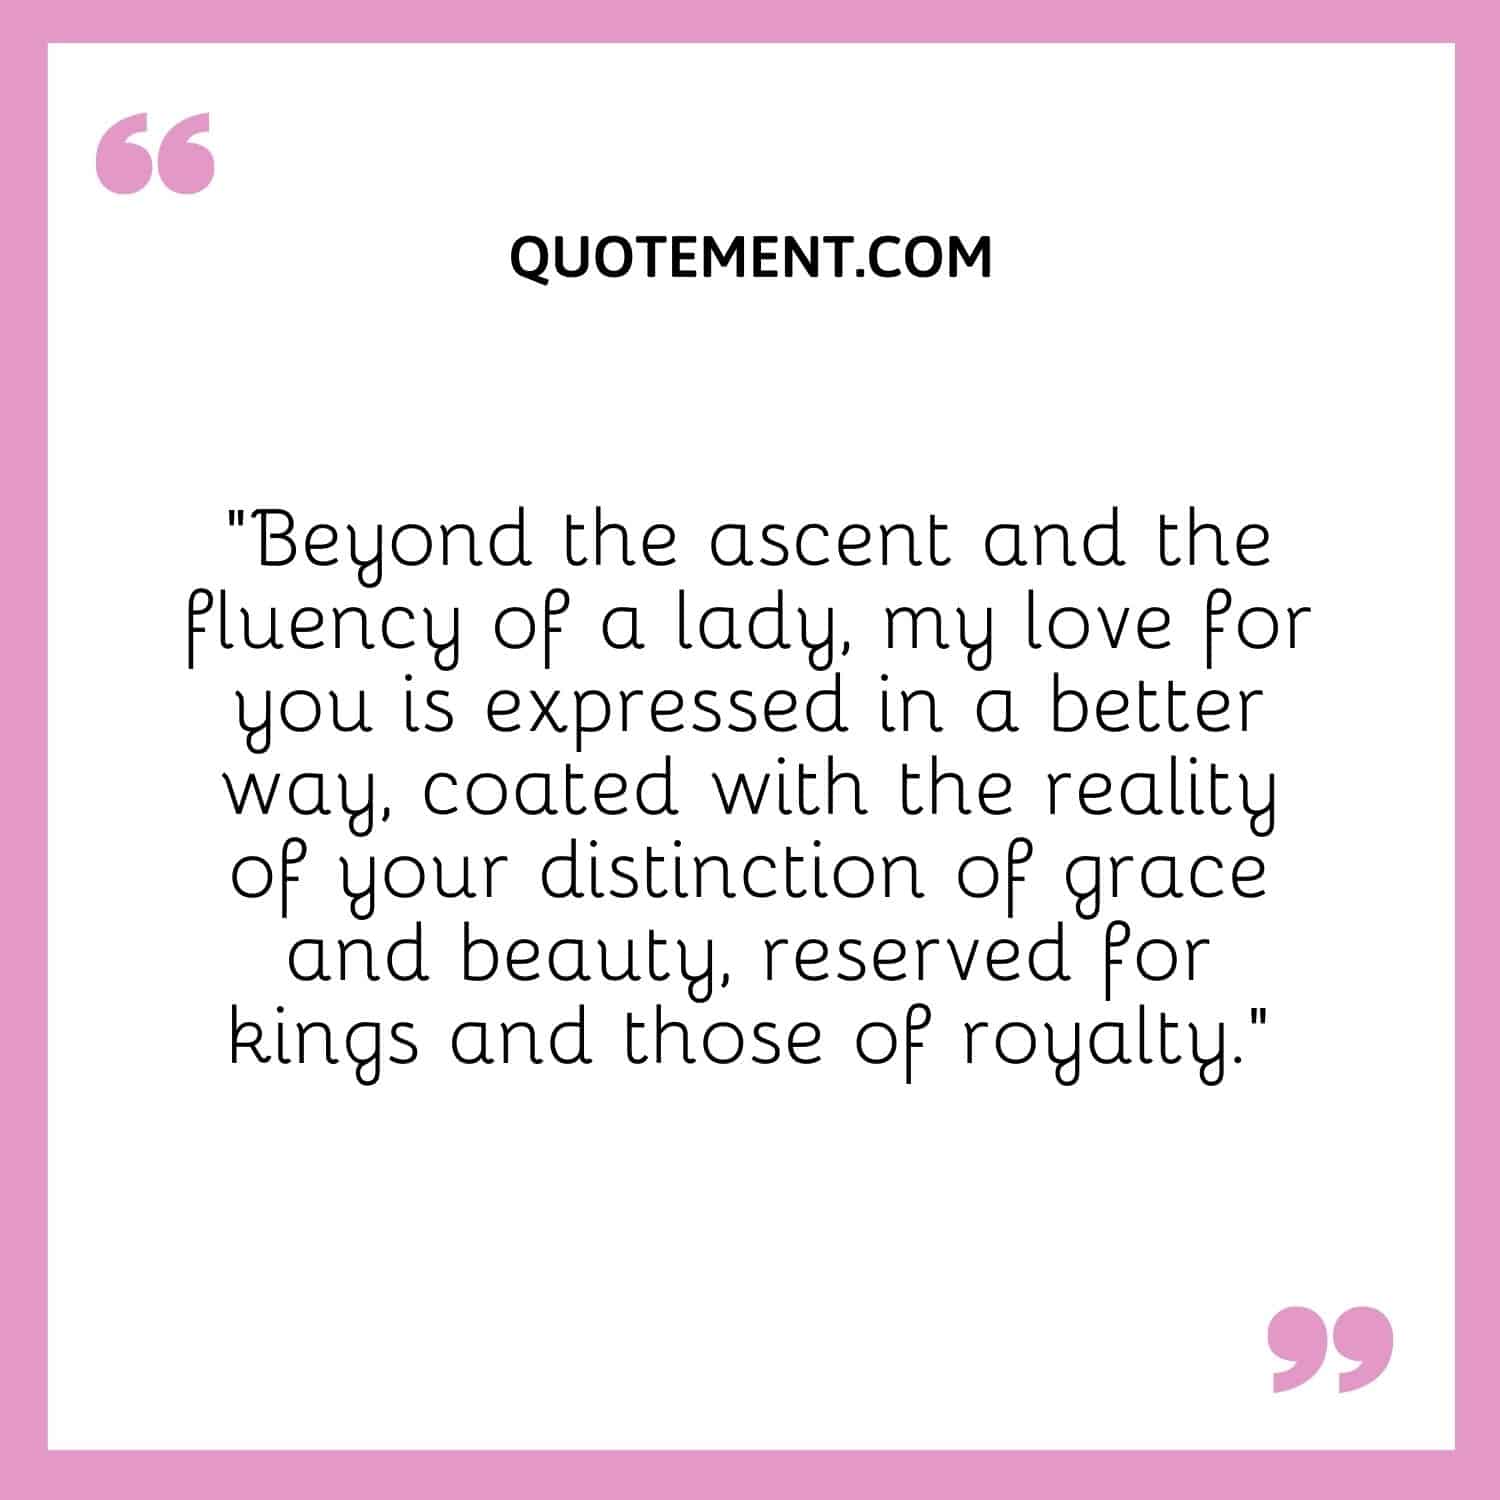 “Beyond the ascent and the fluency of a lady, my love for you is expressed in a better way,